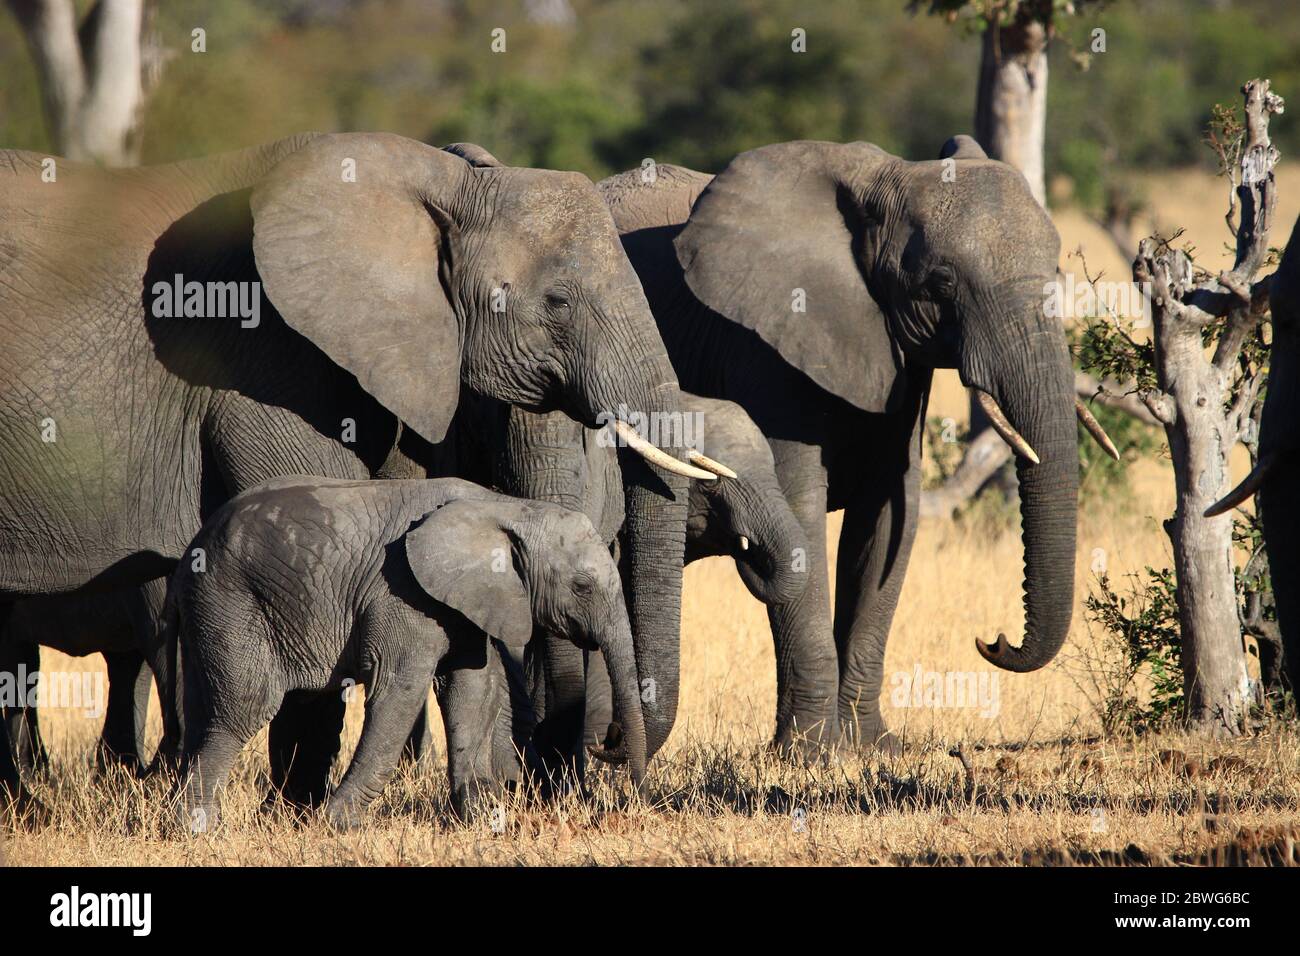 In a peaceful atmosphere, two young elephants are standing very close to each other as they are protected by two adults in the South African savannah. Stock Photo